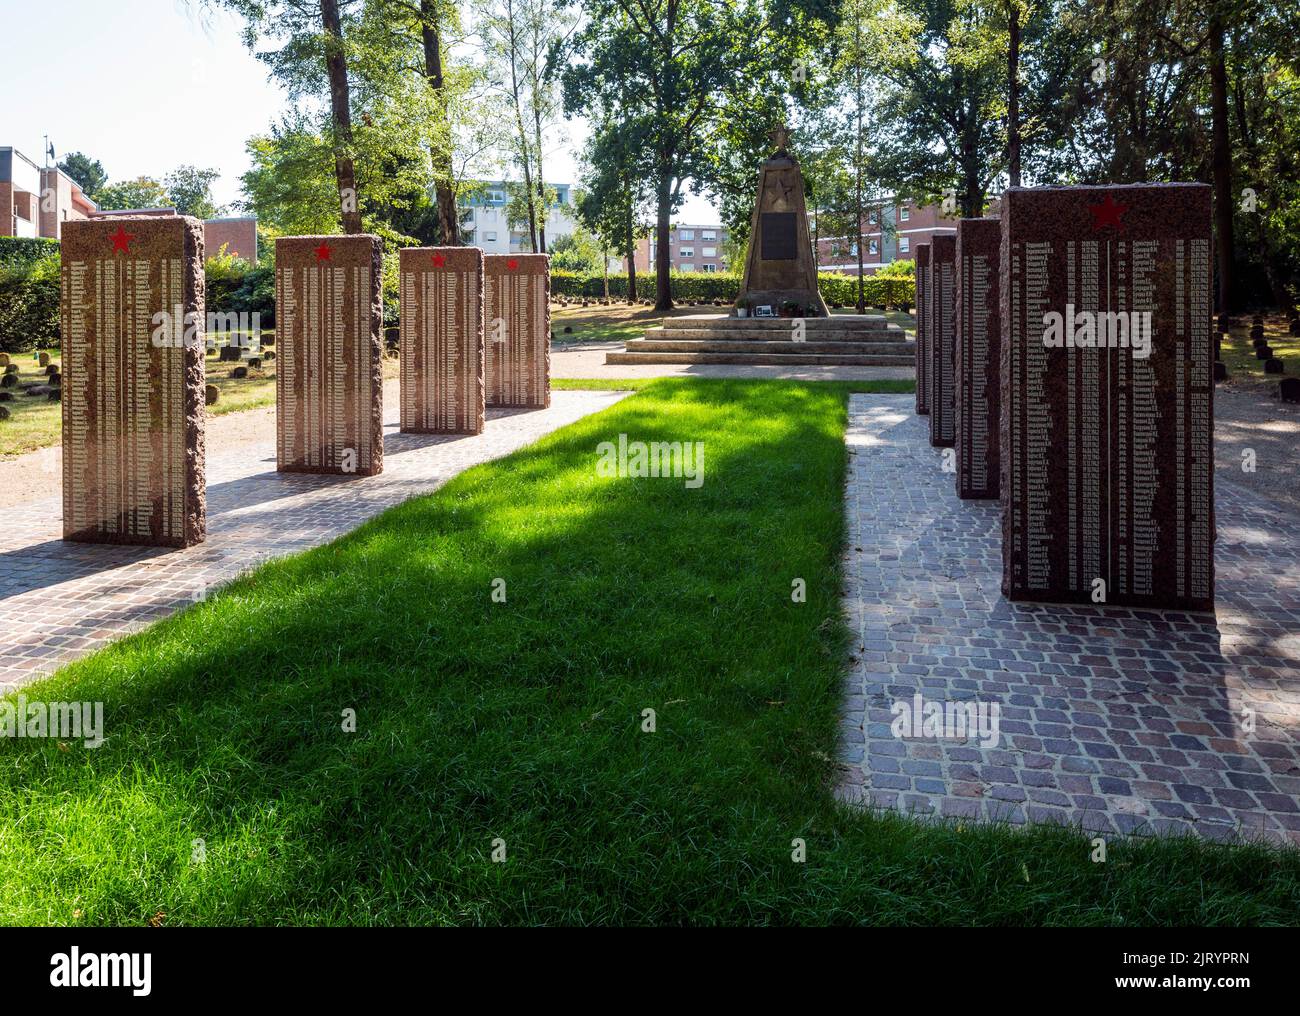 Germany, Bocholt, Lower Rhine, Westmuensterland, Muensterland, Westphalia, North Rhine-Westphalia, NRW, Russian graveyard, war cemetery, tombs for Soviet prisoners of war, soldier cemetery, memorial, obelisk, steles with names of the war victims Stock Photo